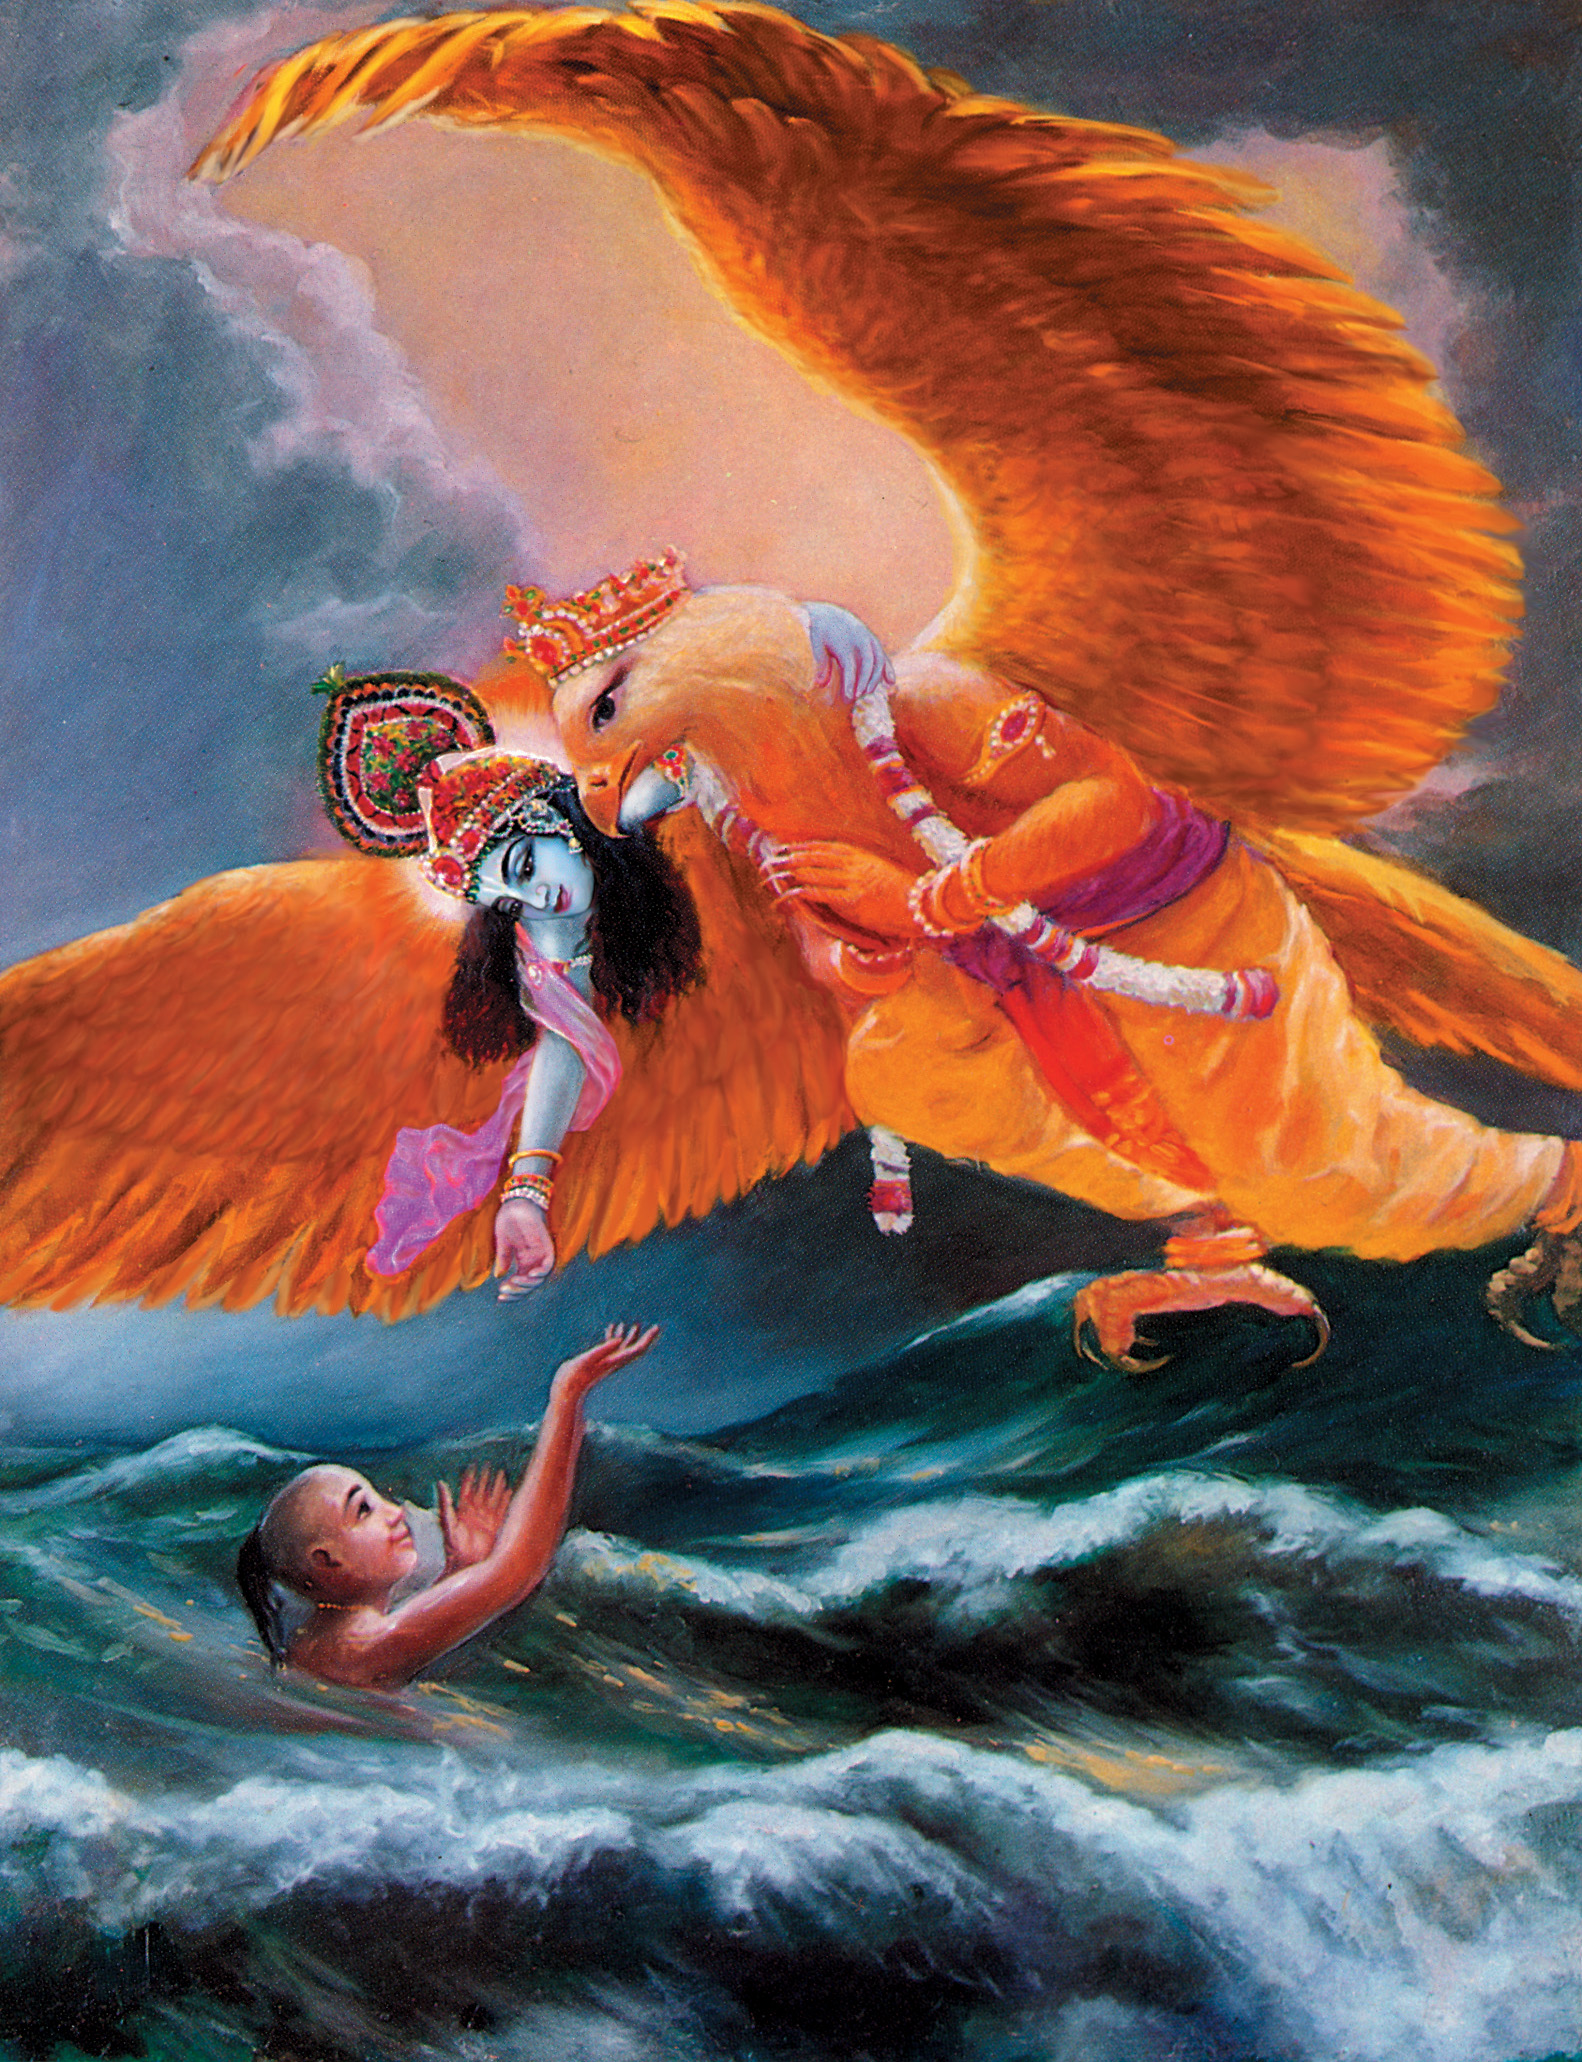 Bhagavad Gita: Krishna delivers His unalloyed devotee from the ocean of birth and death.